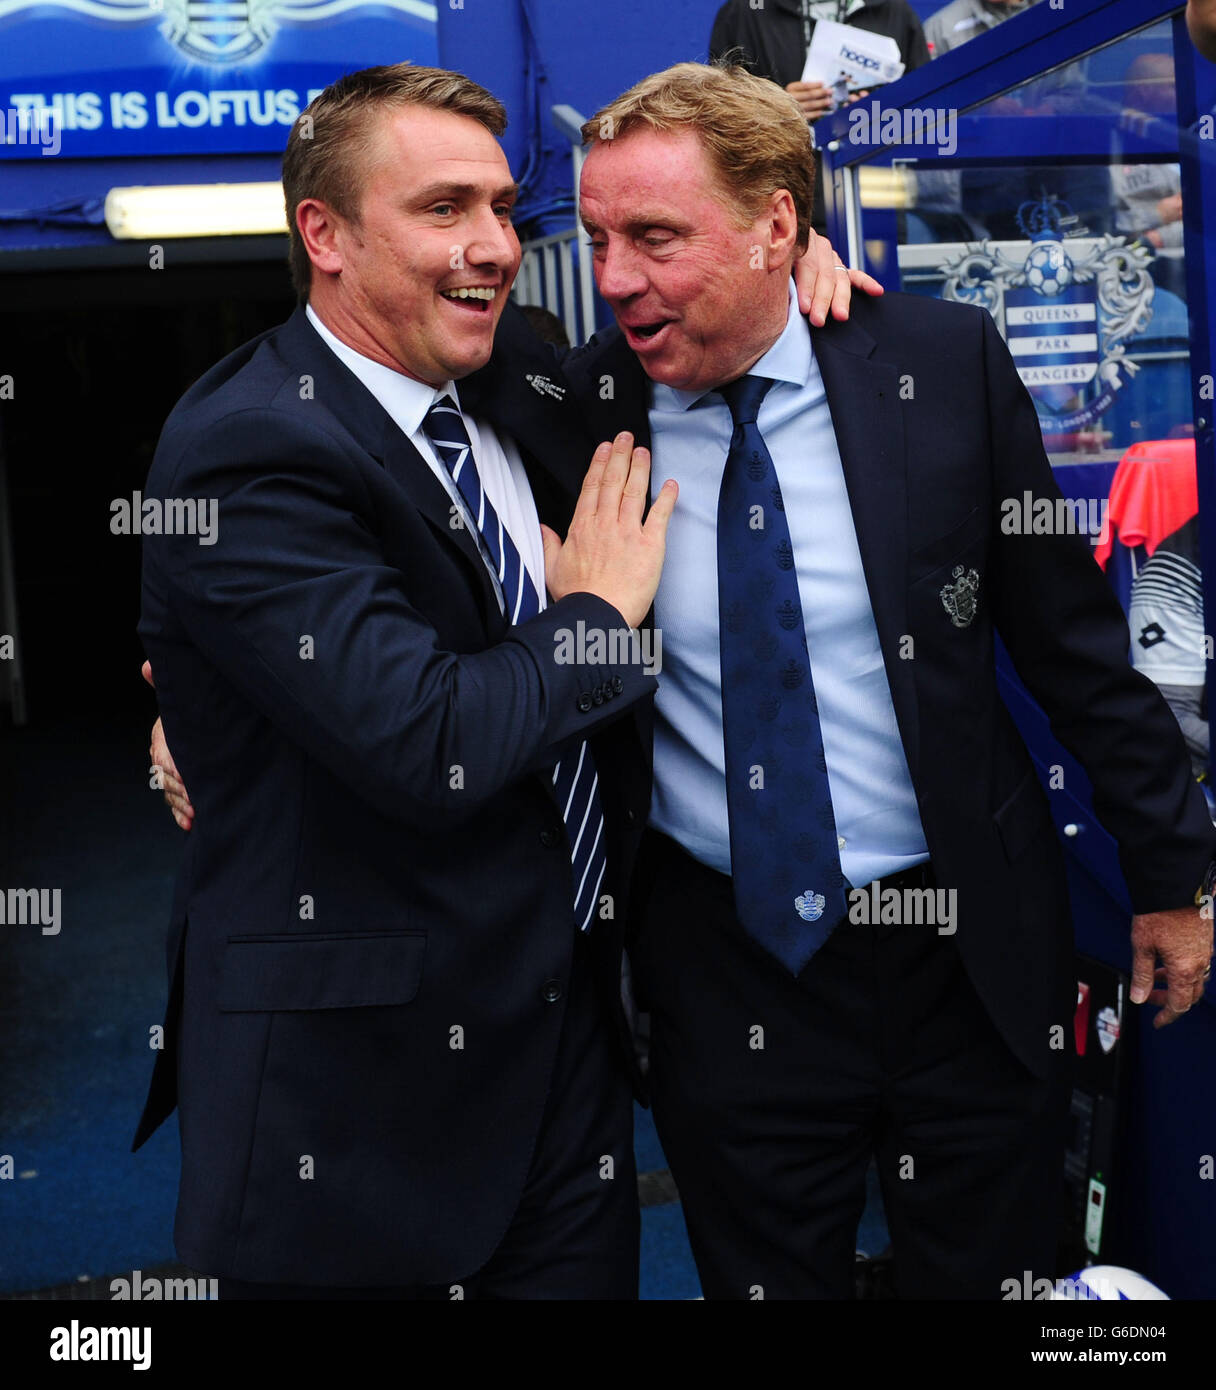 Queens Park Rangers' Harry Redknapp and Birmingham City's Manager Lee Clark before the gamel during the Sky Bet Championship match at Loftus Road, London. Stock Photo